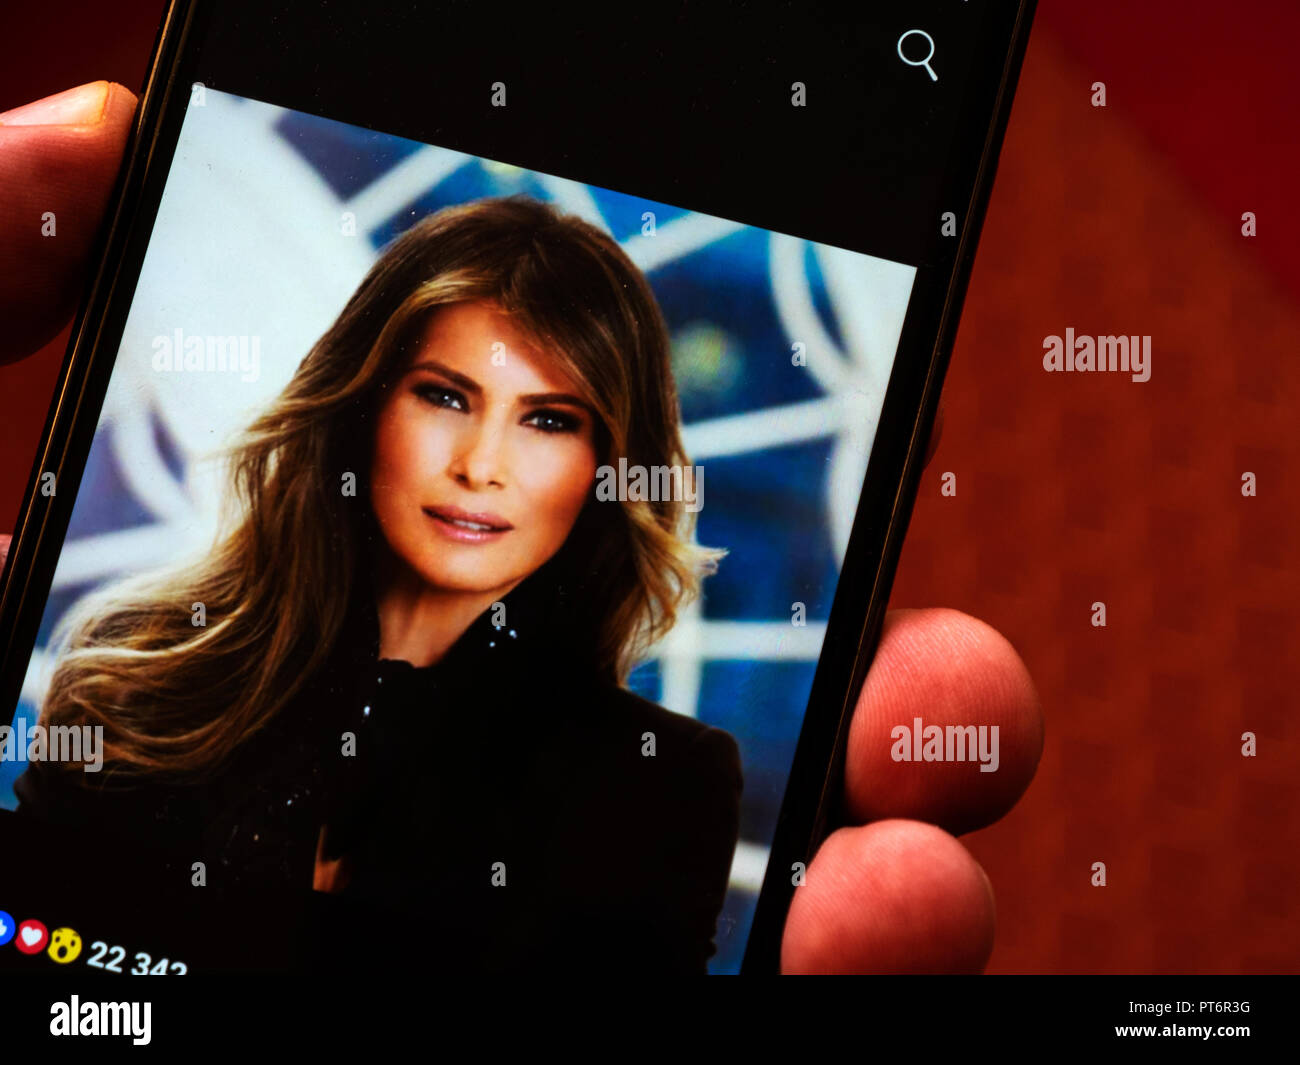 Portrait of First Lady Melania Trump on Facebook account seen displayed on  a smart phone Stock Photo - Alamy